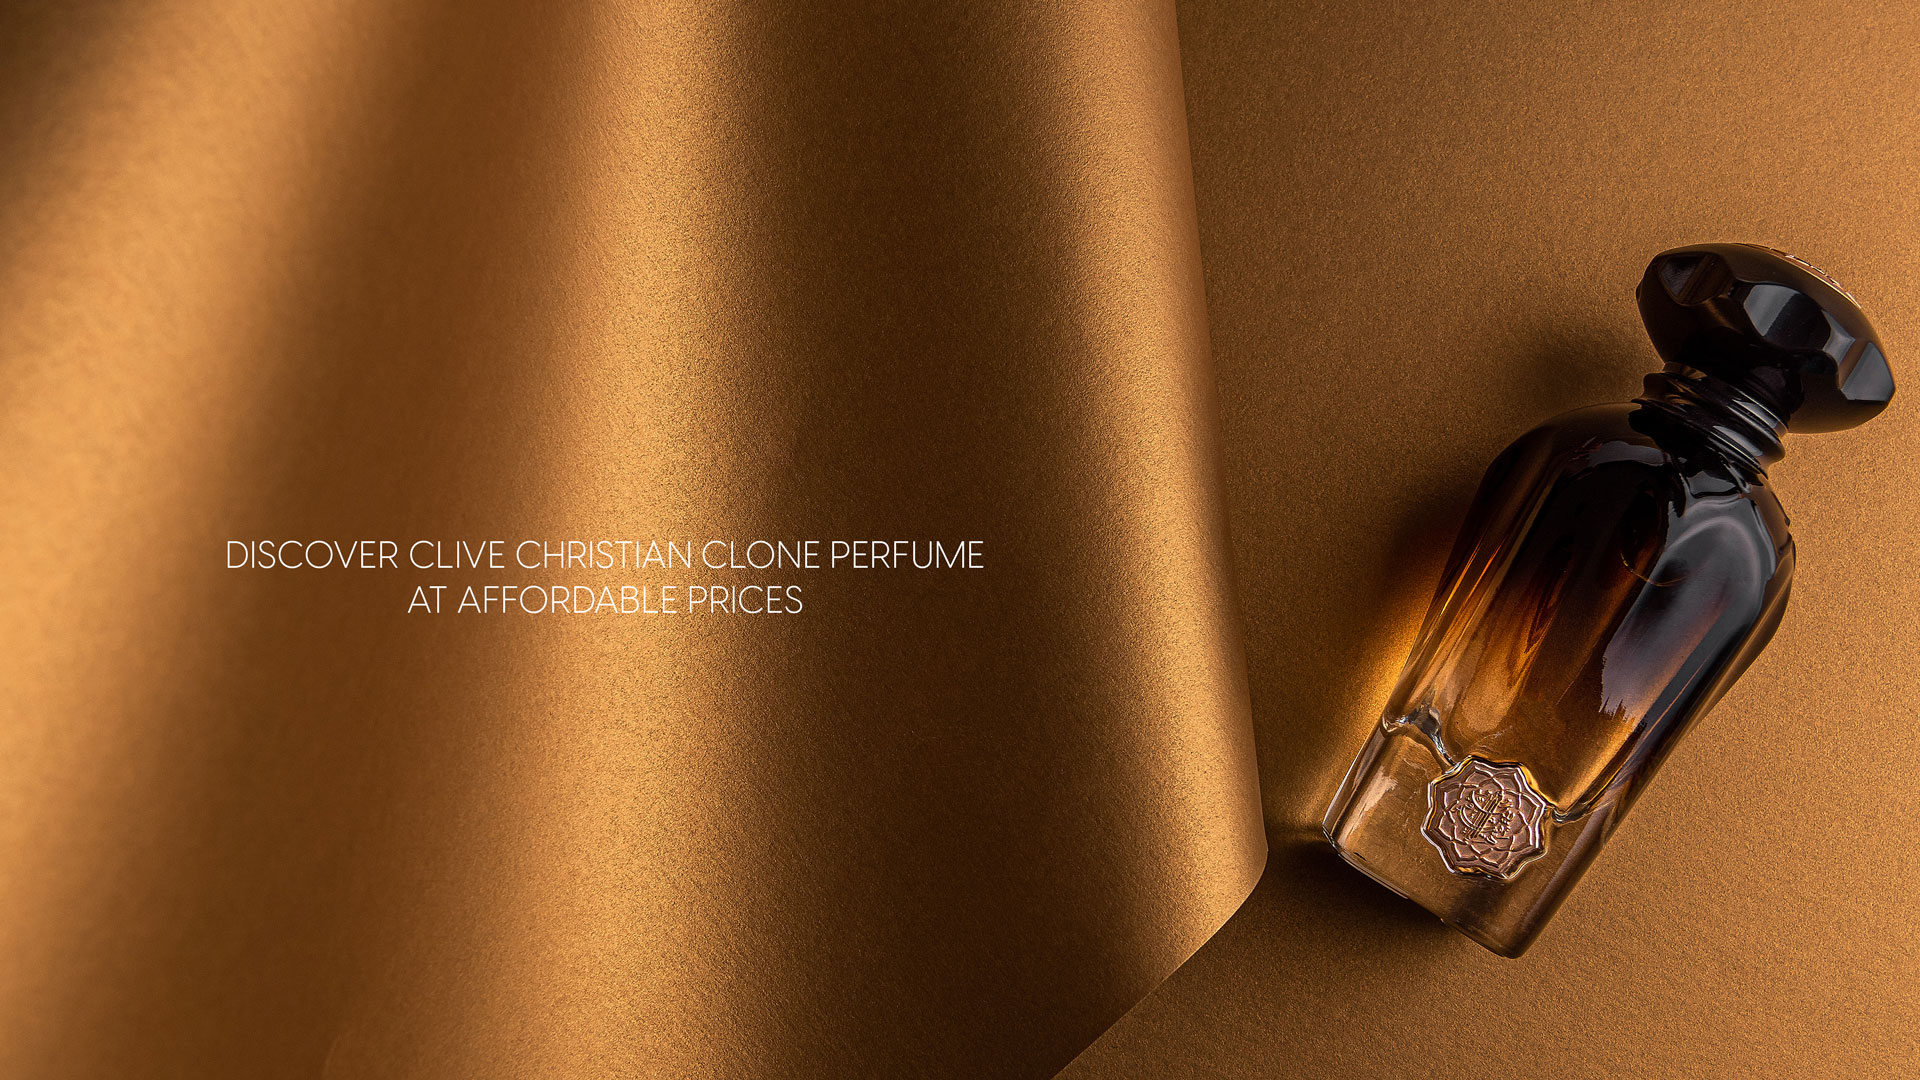 Exquisite Artistry, Exceptional Value: Discover Clive Christian Clone Perfume at Affordable Prices